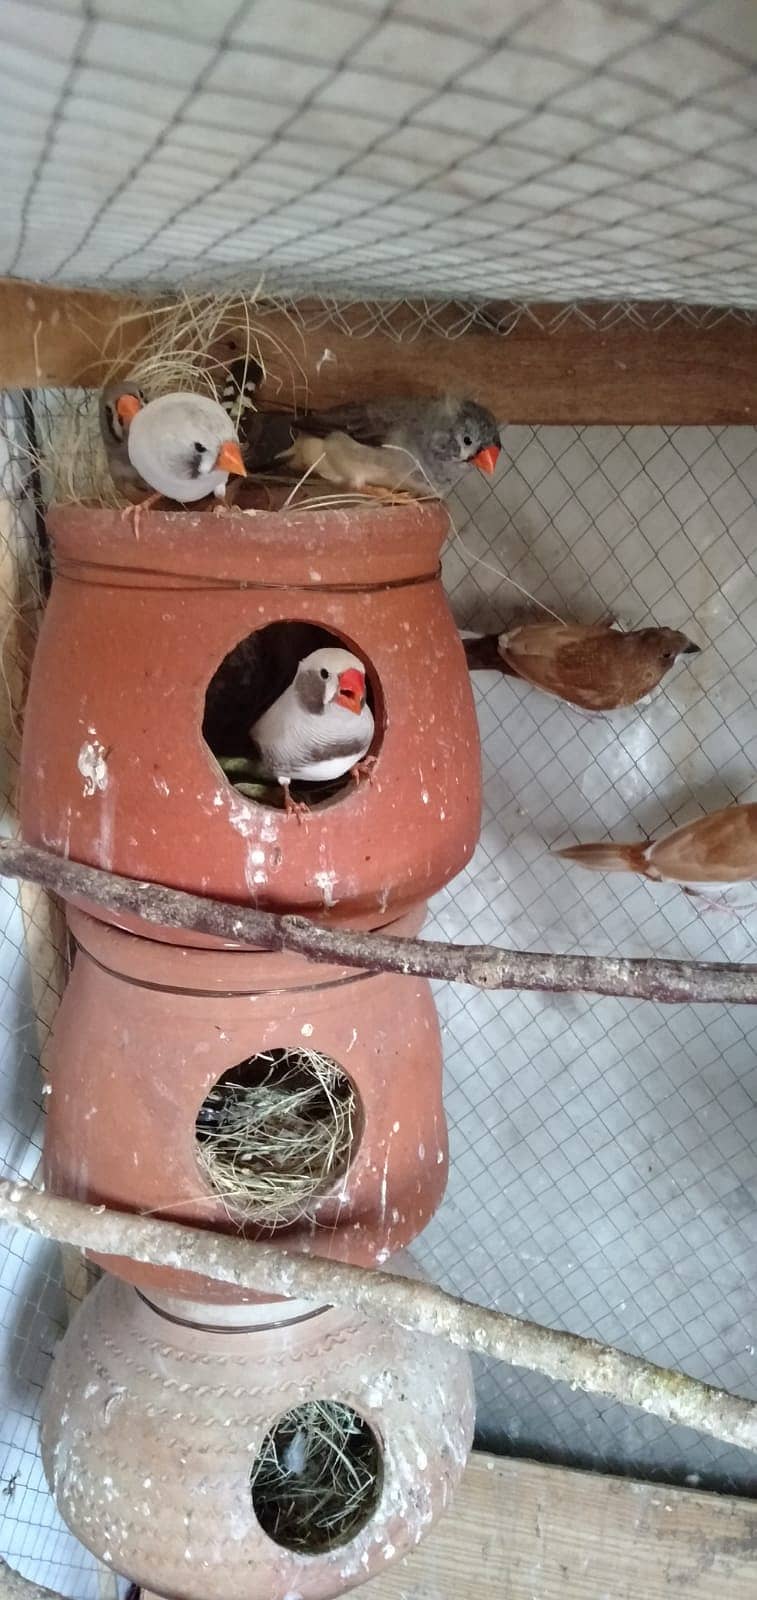 ZEBRA FINCH AND BANGLESE FINCH AND FISHER 3